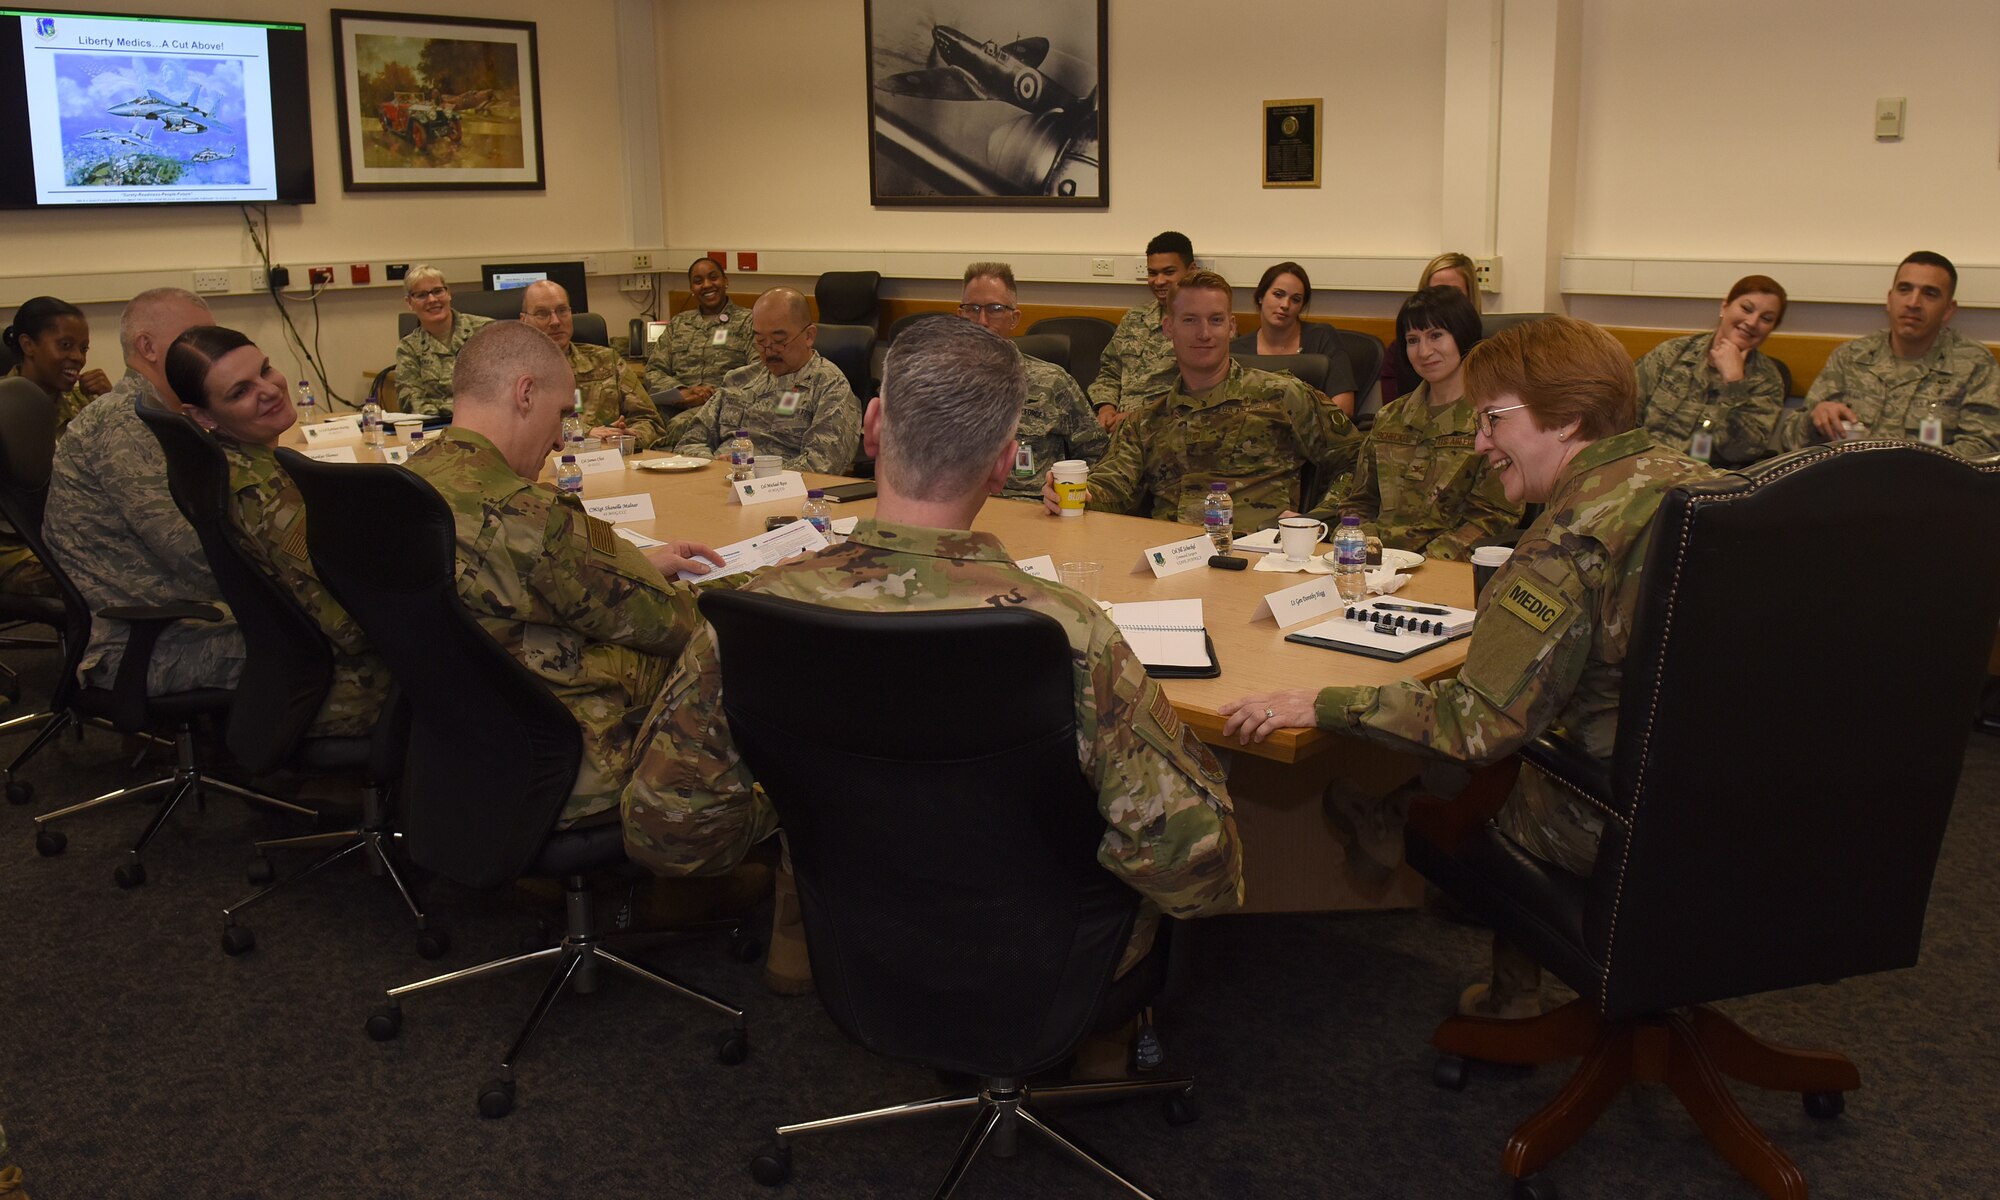 48th Medical Group personnel speak with Lt. Gen. Dorothy A. Hogg, U.S. Air Force surgeon general, at Royal Air Force Lakenheath, England, Feb. 28, 2019. Airmen highlighted the importance of the 48th MDG’s mission to support readiness and to improve interoperability and clinical skills. (U.S. Air Force photo by Airman 1st Class Madeline Herzog)